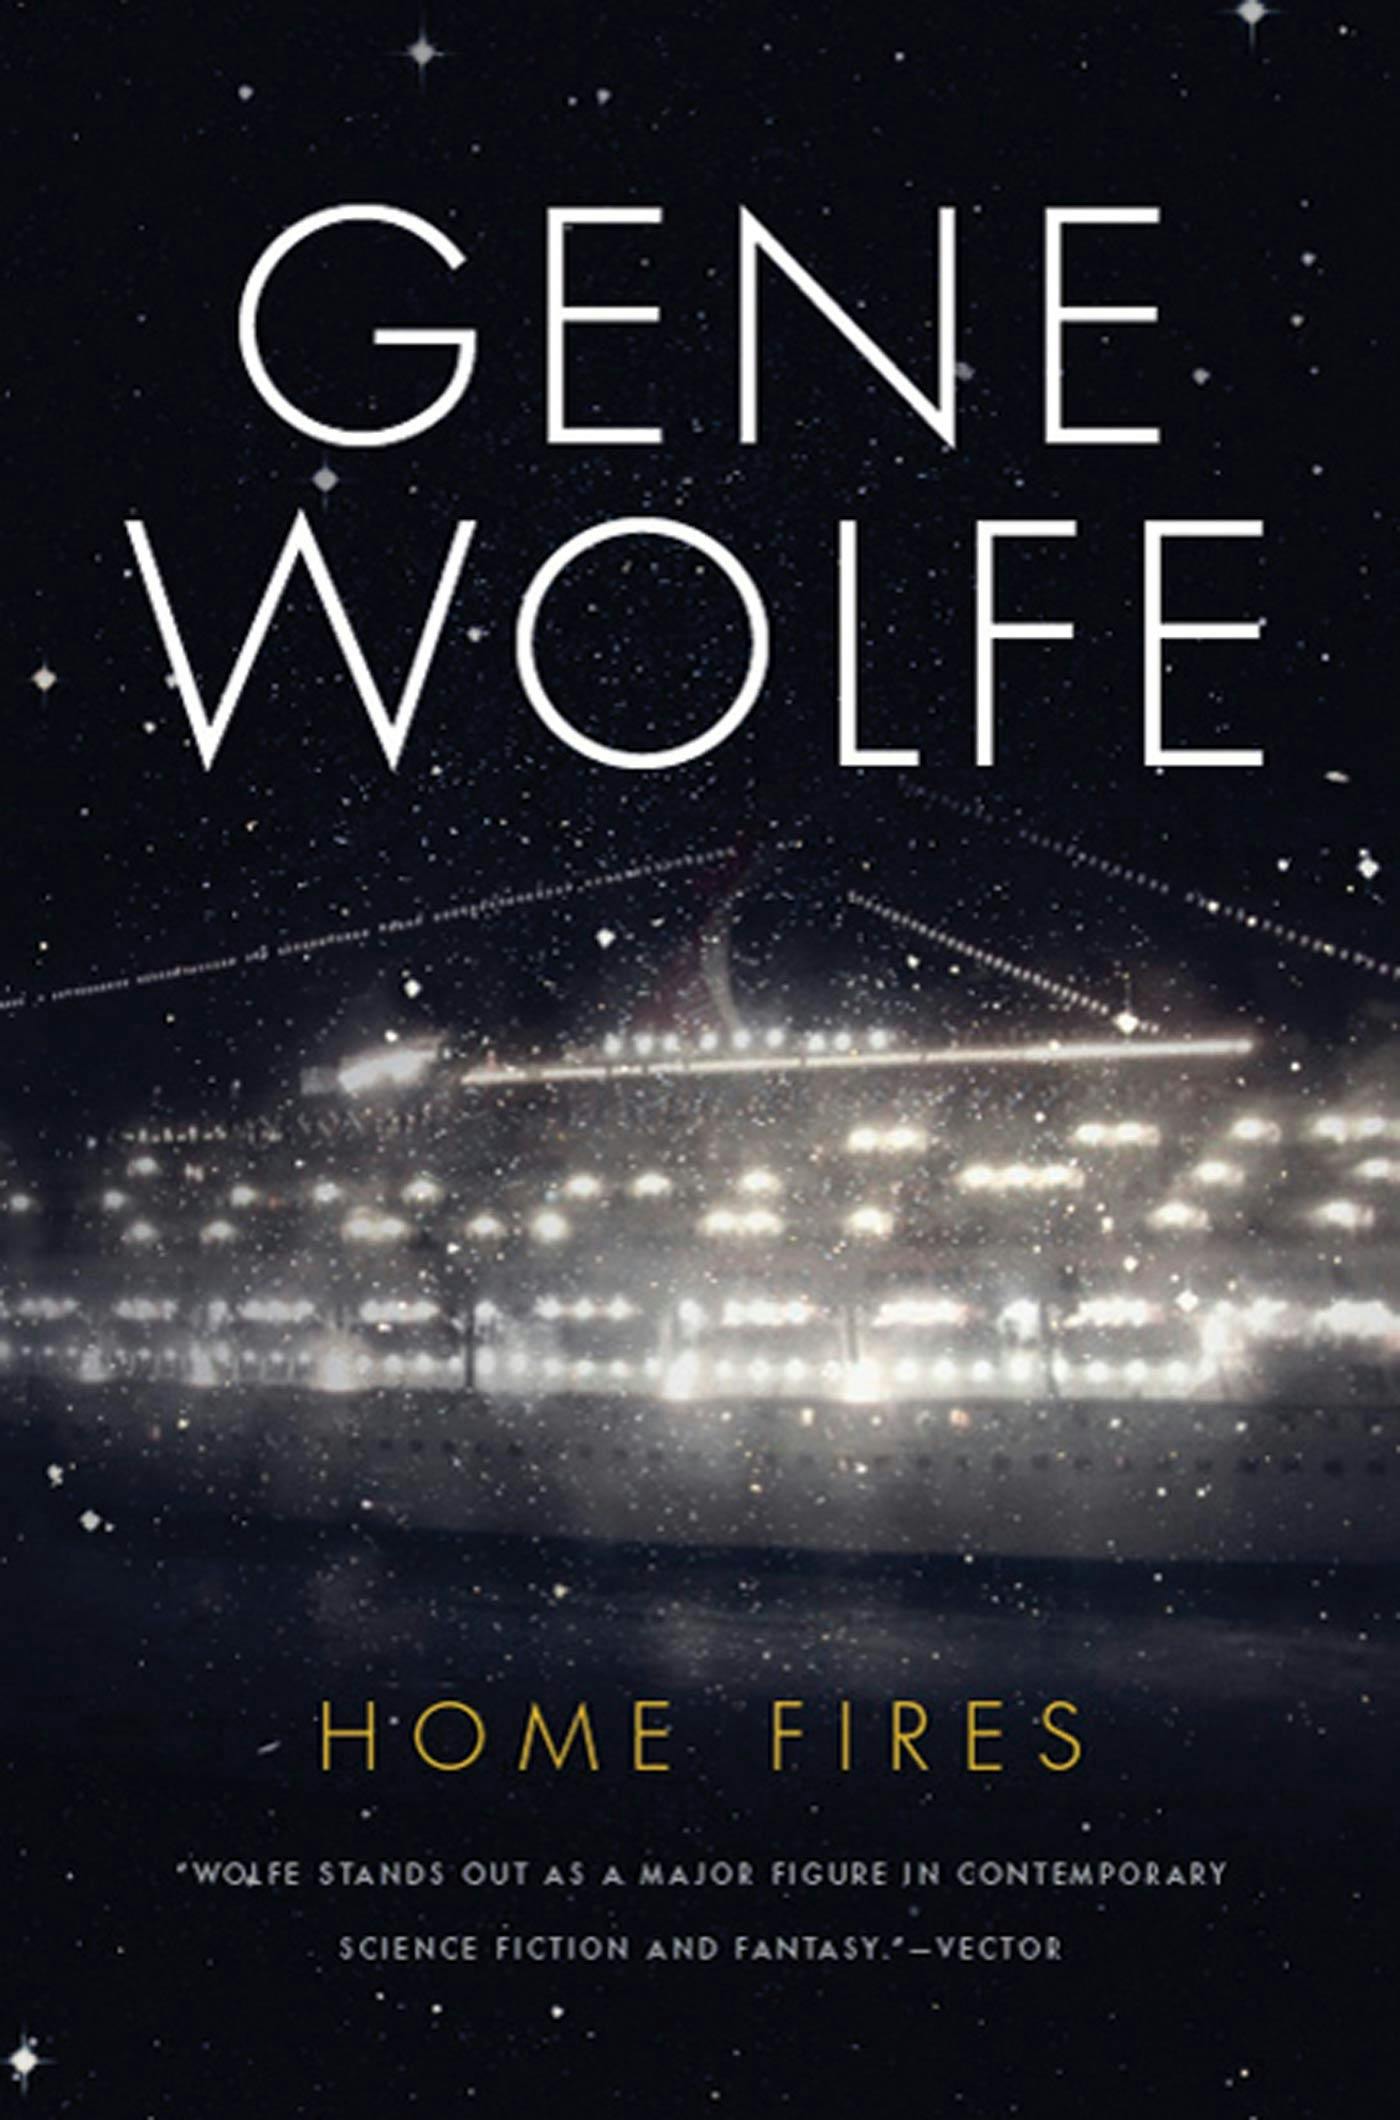 Cover for the book titled as: Home Fires